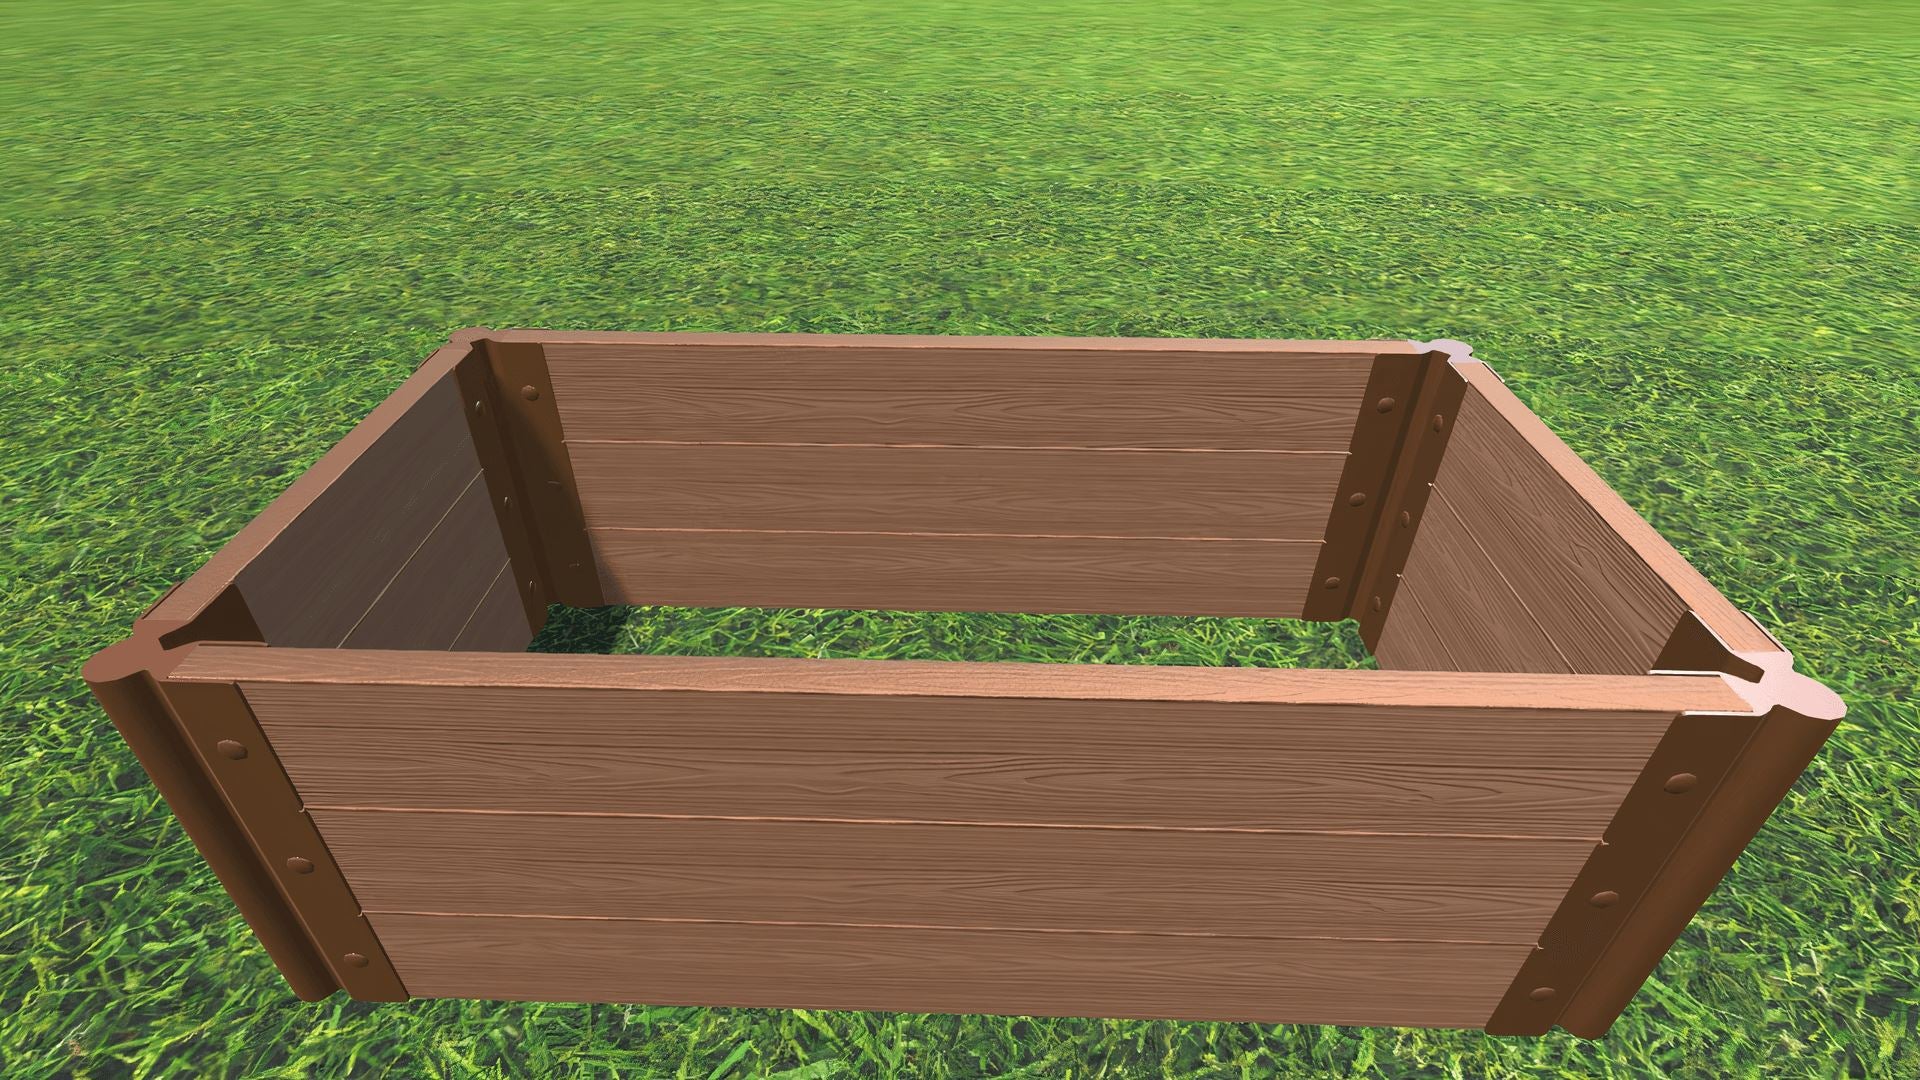 Tool-Free 2' x 4' Raised Garden Bed Raised Bed Planters Frame It All Classic Sienna 2" 3 = 16.5"